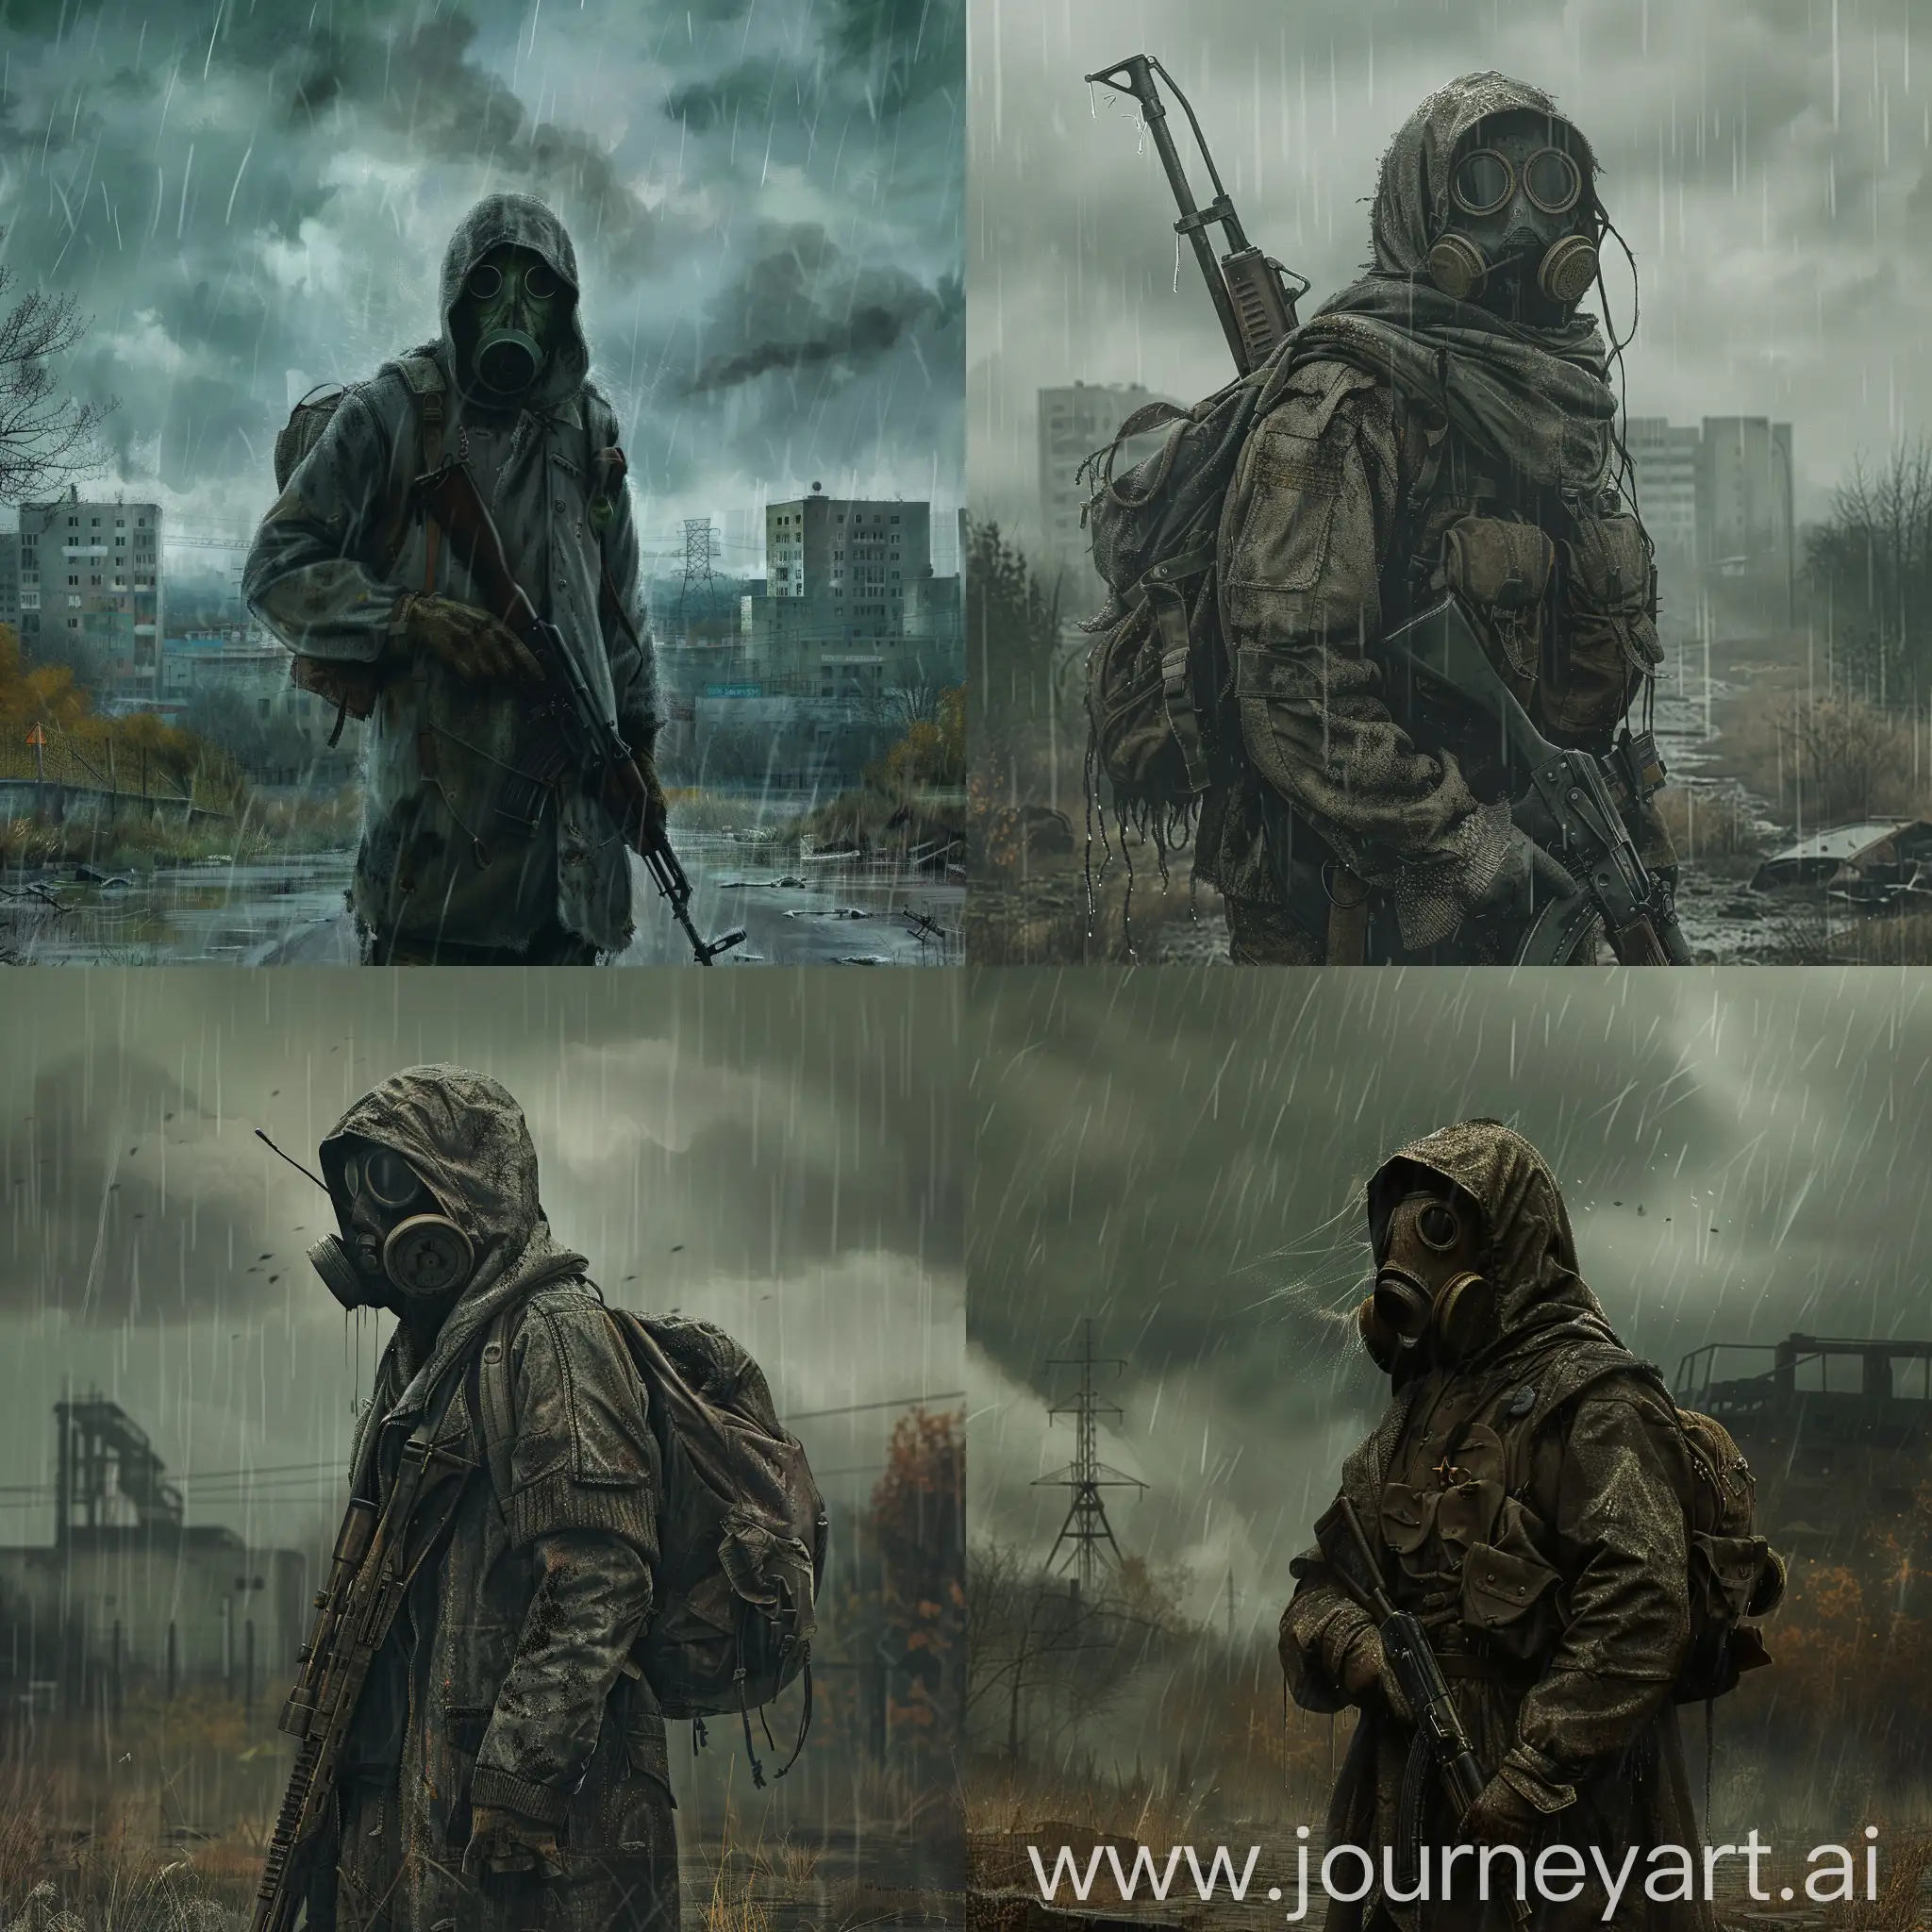 The universe of stalker art, gloomy autumn, a lone stalker stands in the middle of a wasteland in the dead Chernobyl city of Pripyat, it is raining radiatively, the clouds are dark green, the stalker is wearing a dirty and worn gray sweater, a torn and worn brown raincoat over the sweater, a gas mask on the stalker's face, a Mosin sniper rifle in his hands, on his back a backpack.